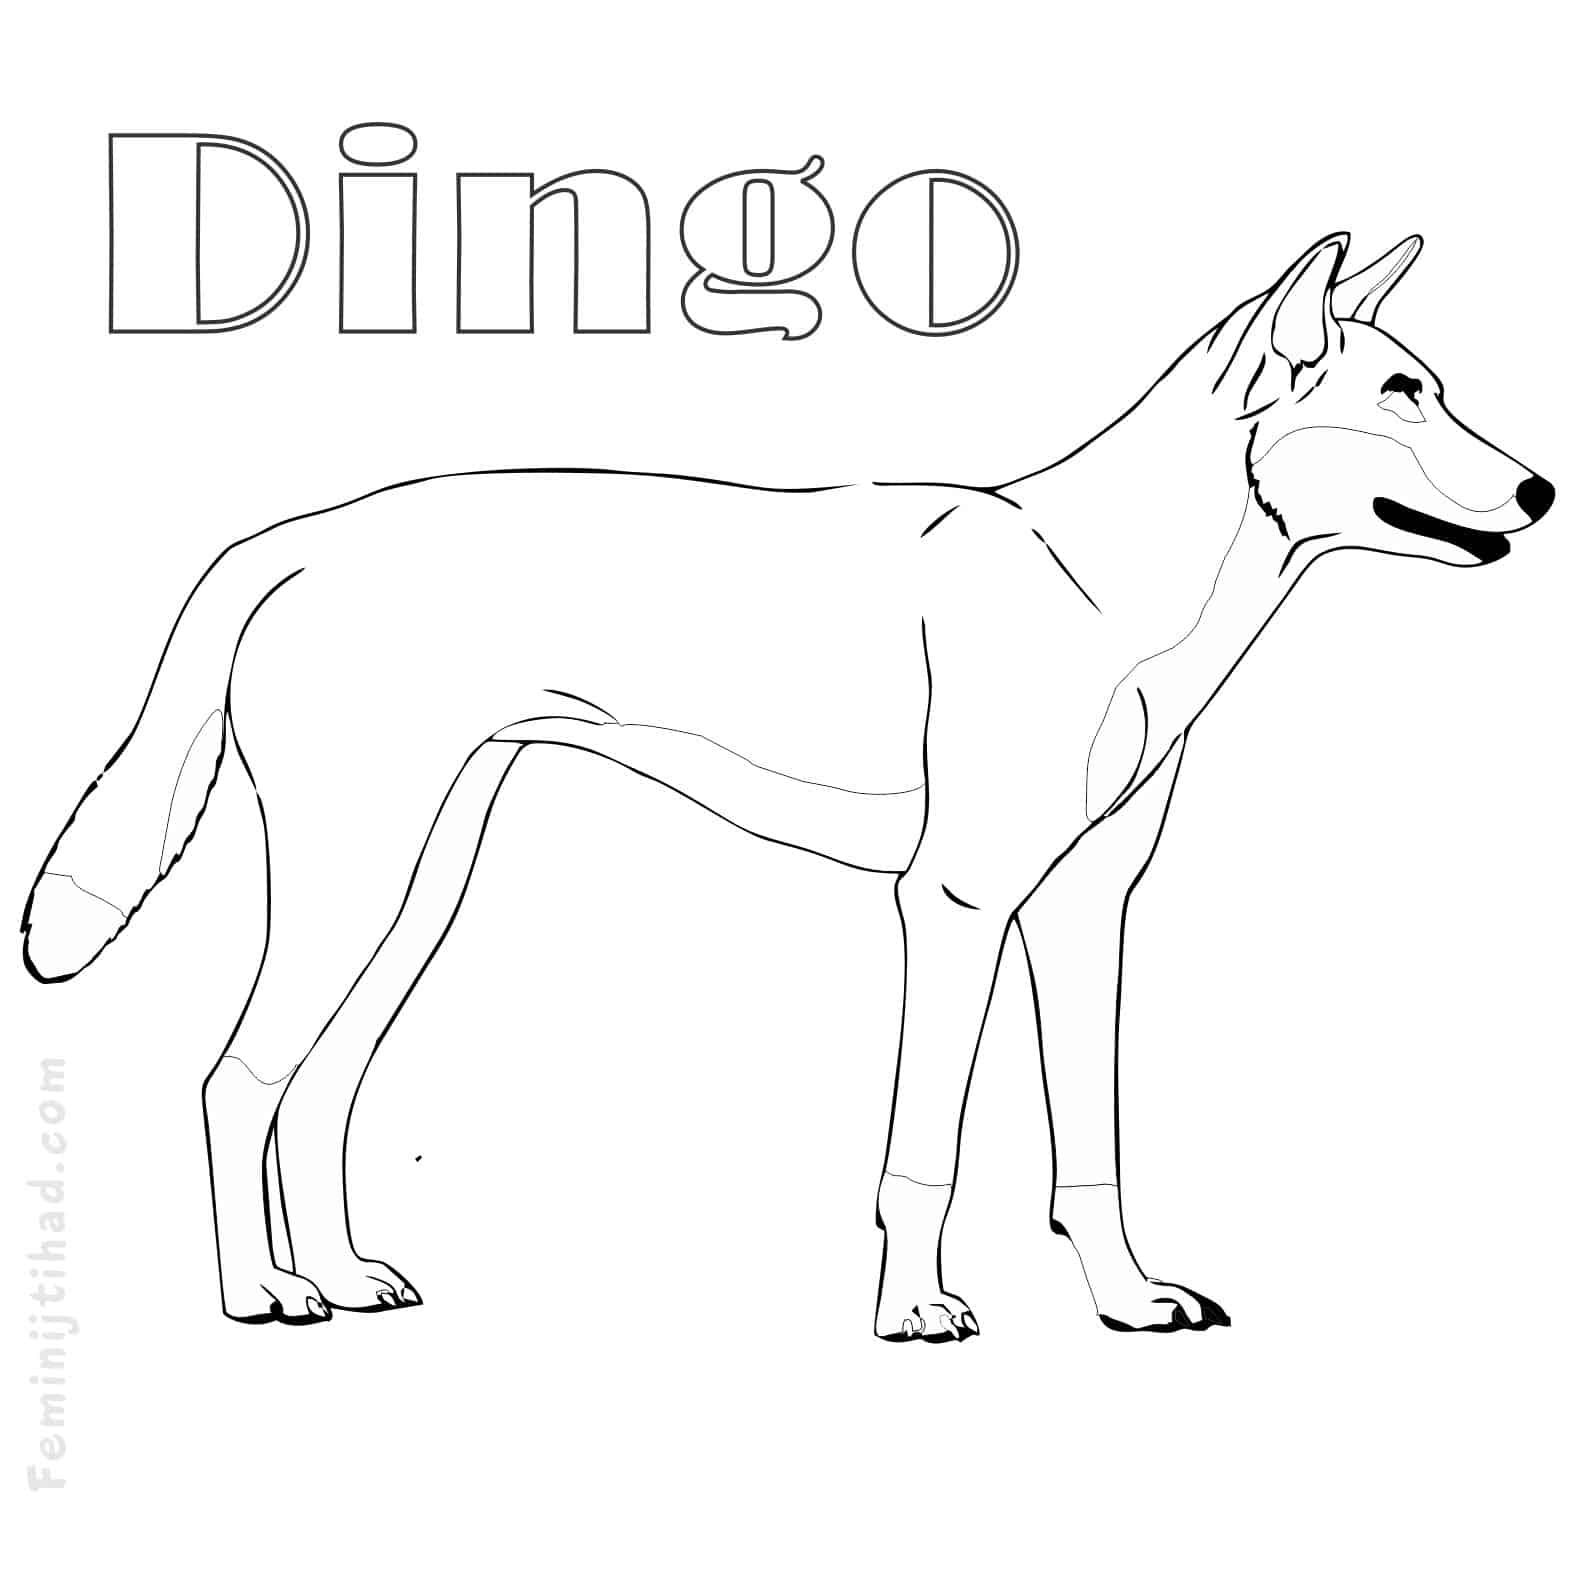 Easy dingo coloring pages pdf